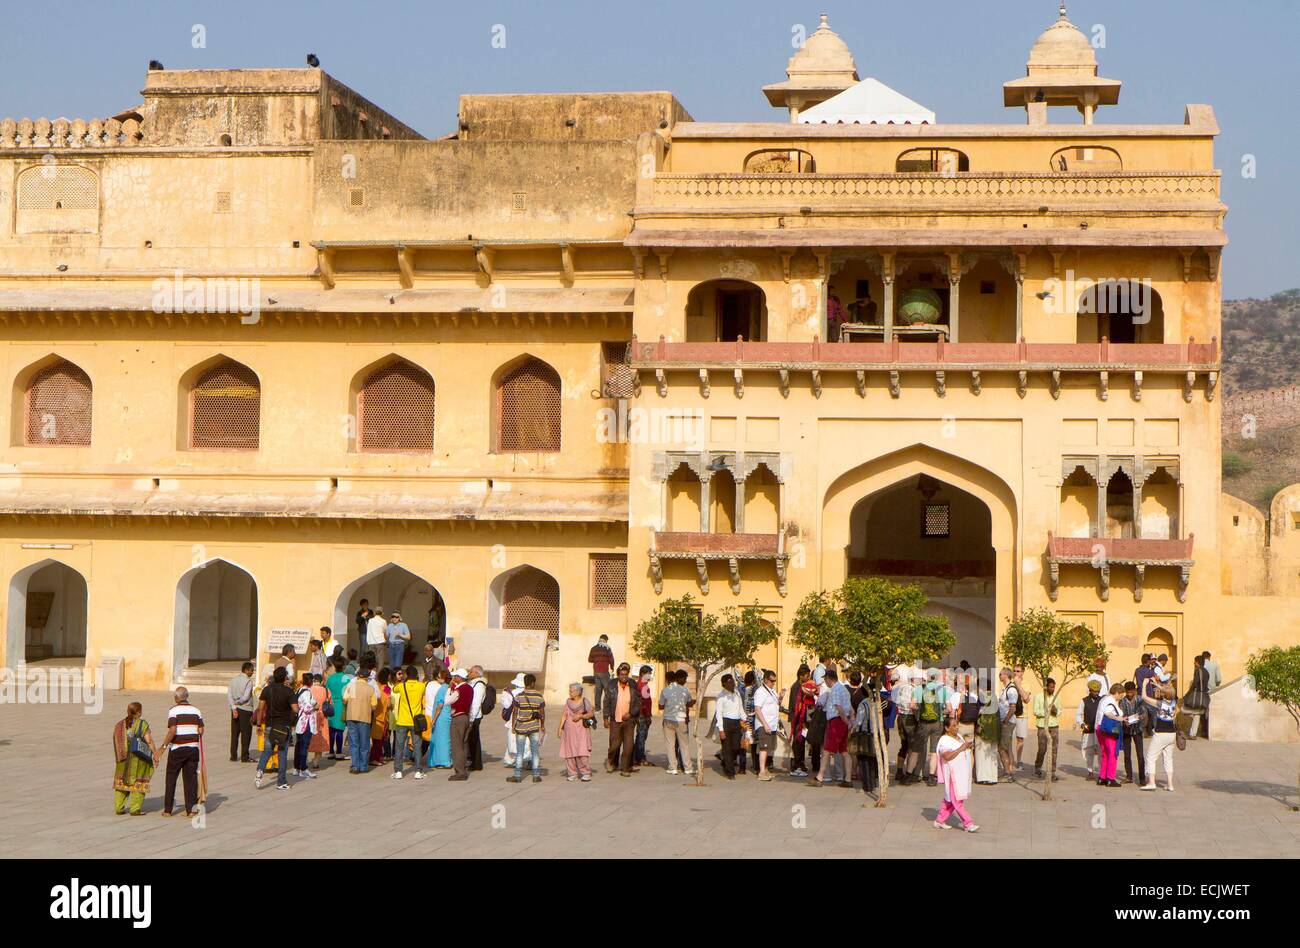 India, Rajasthan state, Hill Forts of Rajasthan listed as World Heritage by UNESCO, Jaipur, Amber Fort, tourists Stock Photo